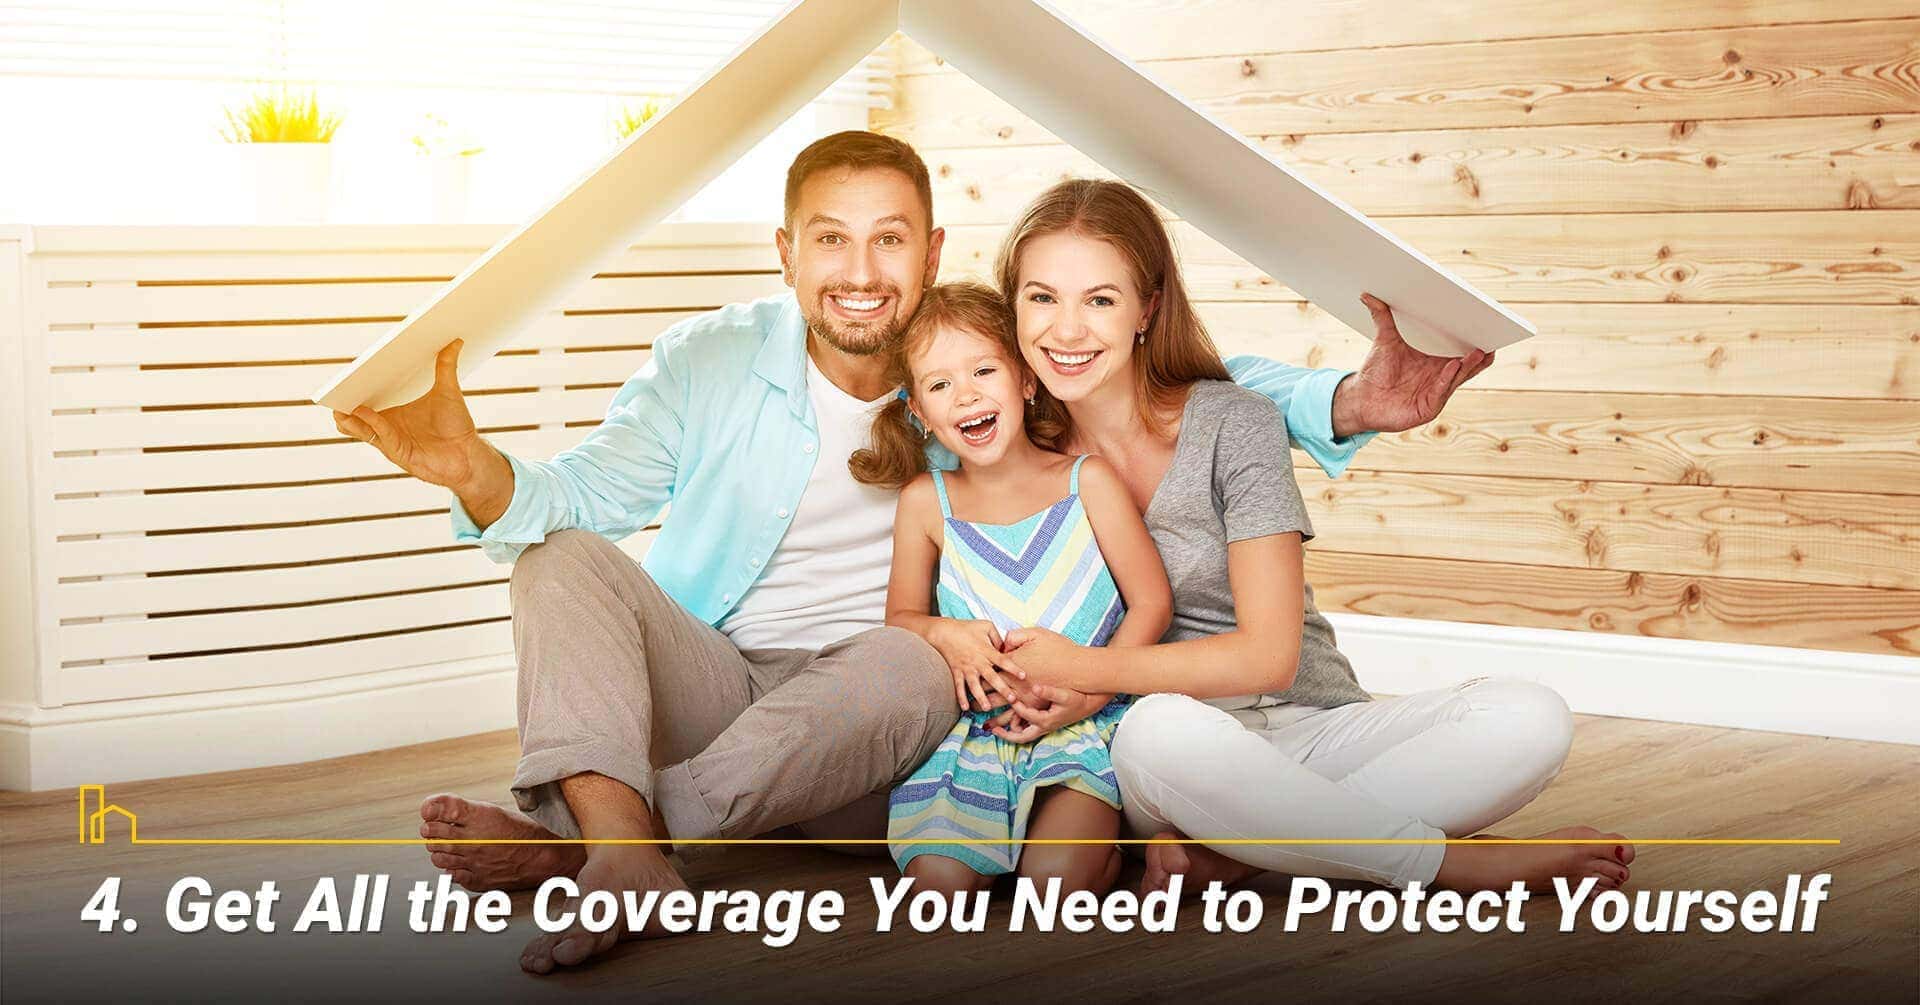 Get All the Coverage You Need to Protect Yourself, make sure you are protected